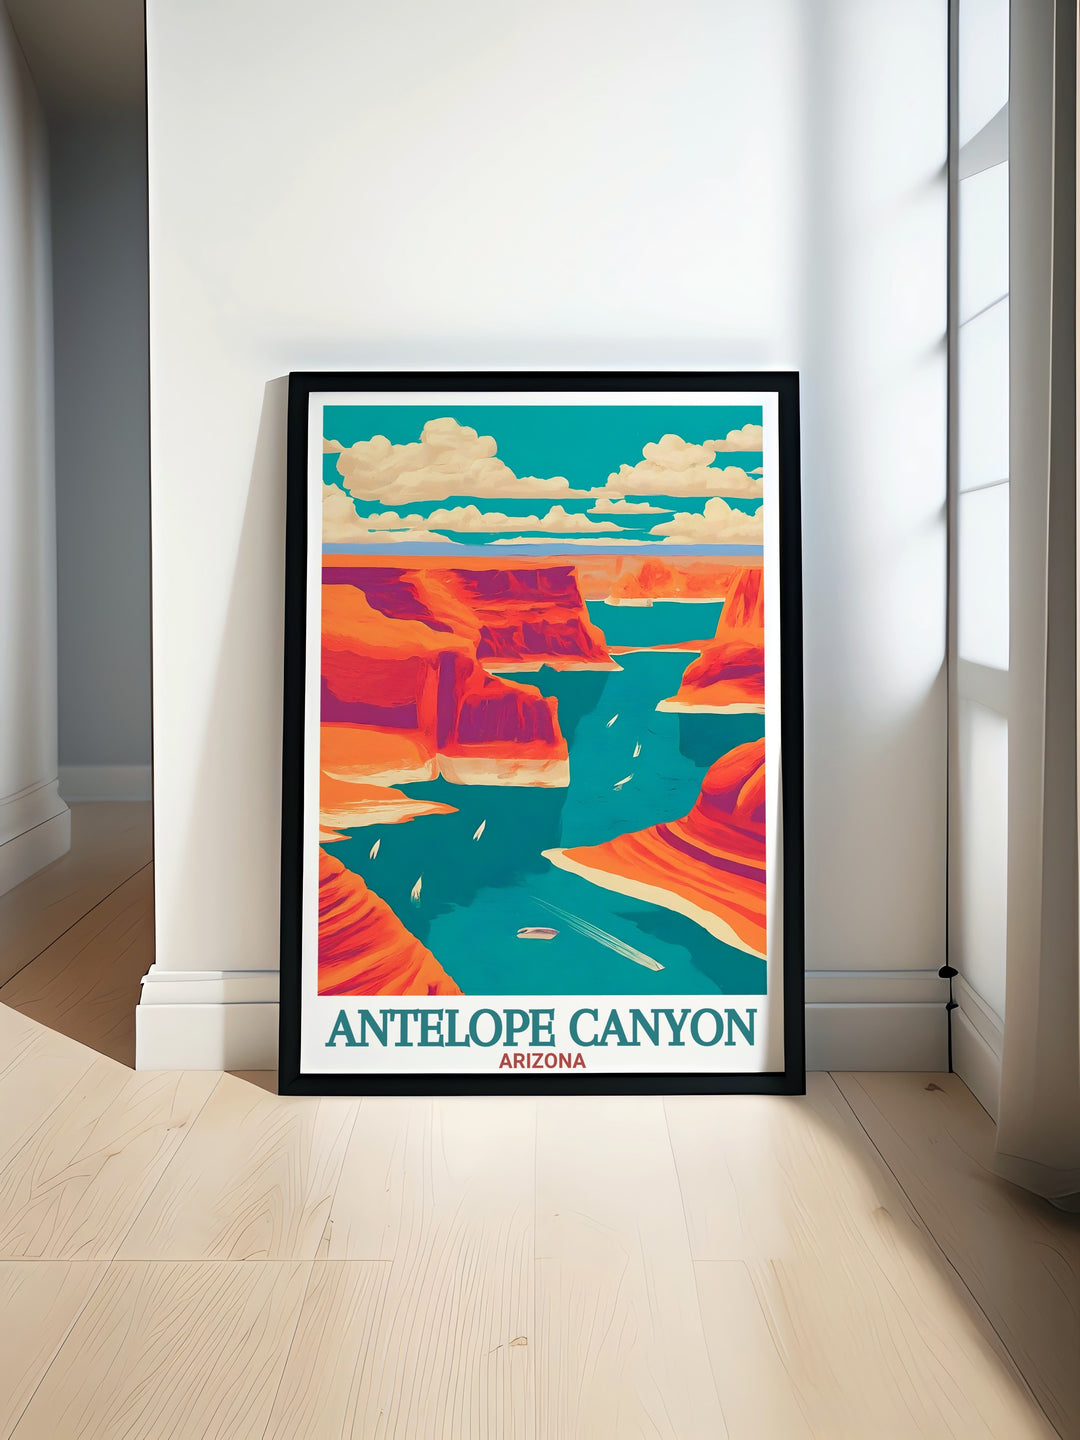 Lake Powell art print showcasing the stunning vistas and crystal clear waters of this iconic Arizona destination perfect for adding a touch of natural beauty to any space or as a unique Arizona travel gift for art and nature enthusiasts.